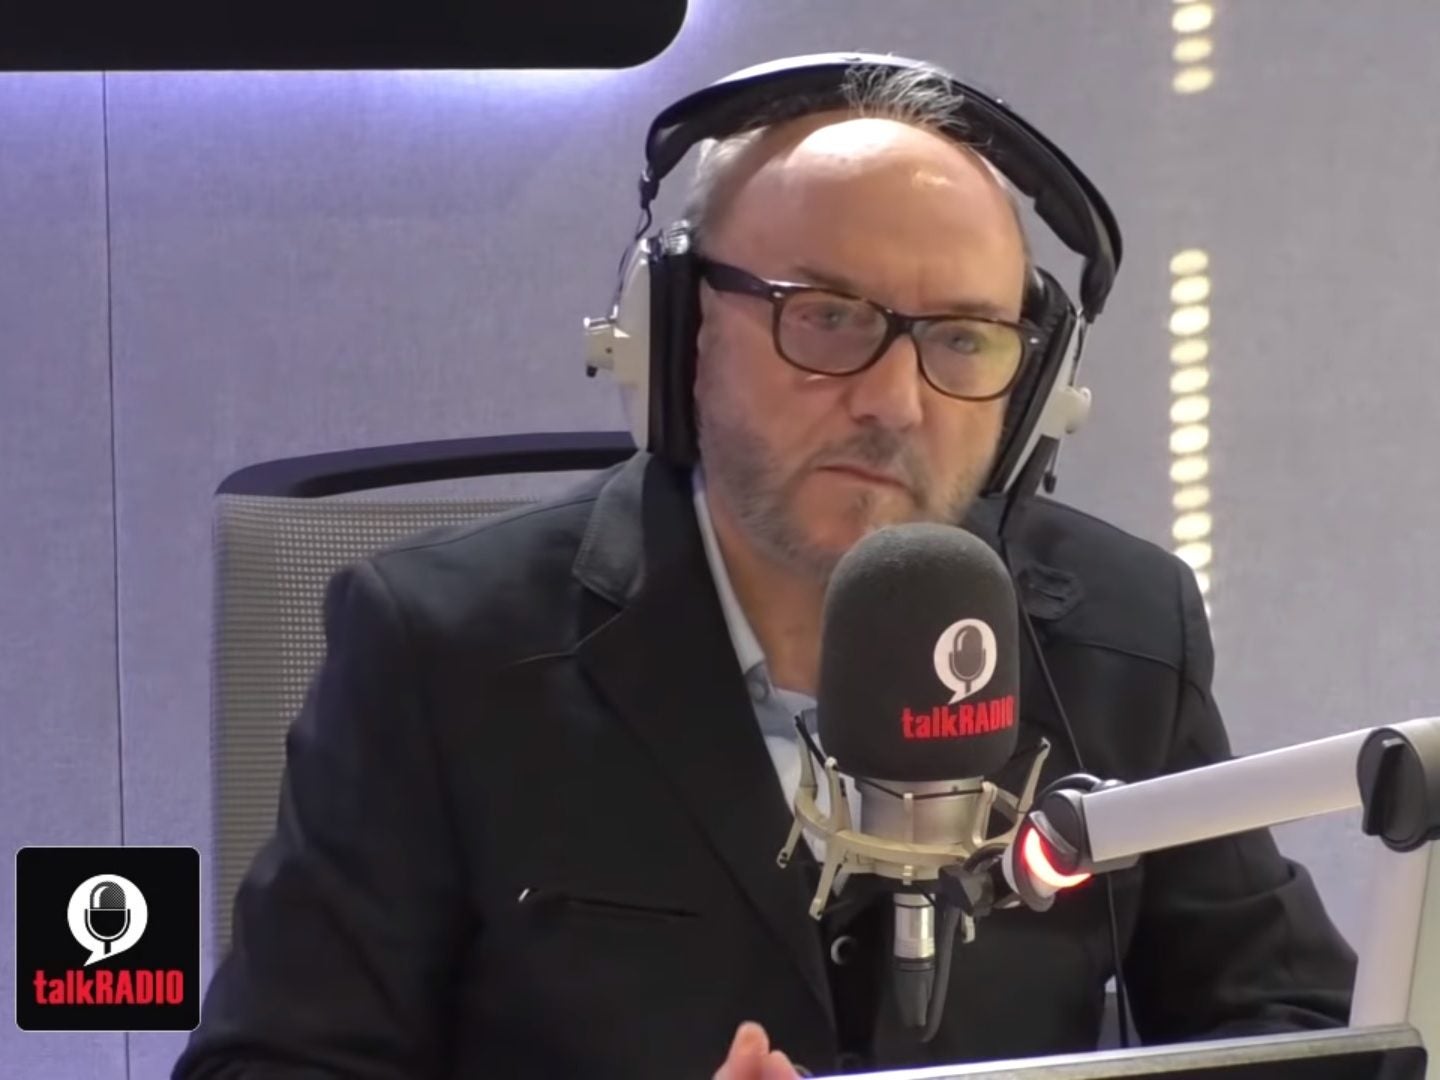 Talkradio fined £75,000 over Broadcasting Code breaches by ex-host George Galloway